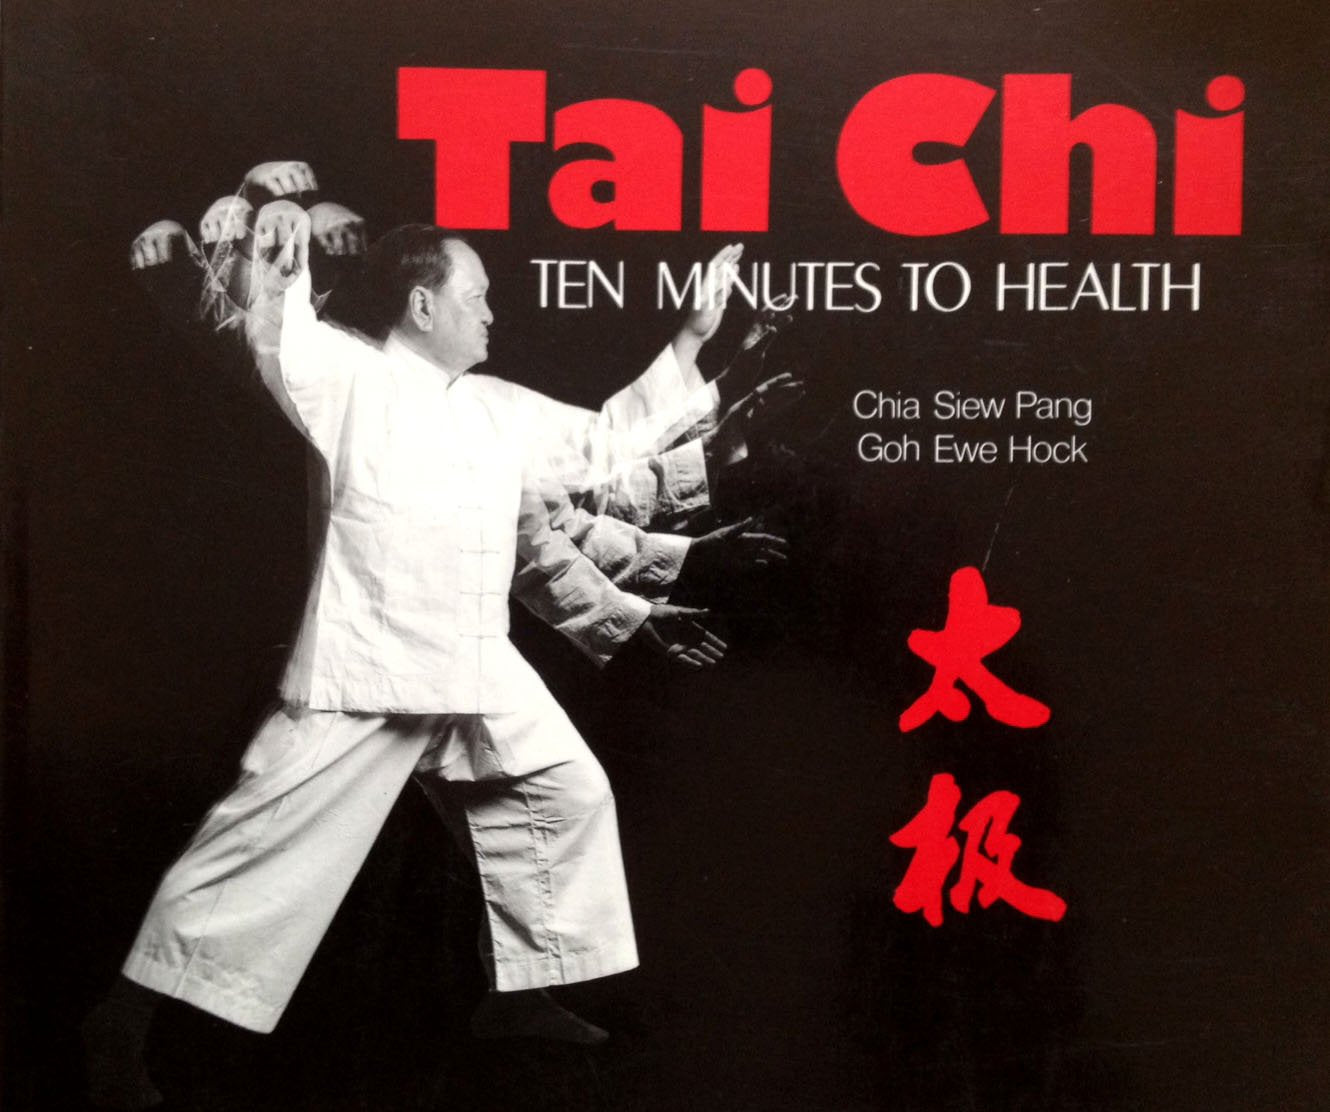 Tai Chi - Ten Minutes To Health Book by Goh Ewe Pang (Preowned) - Budovideos Inc